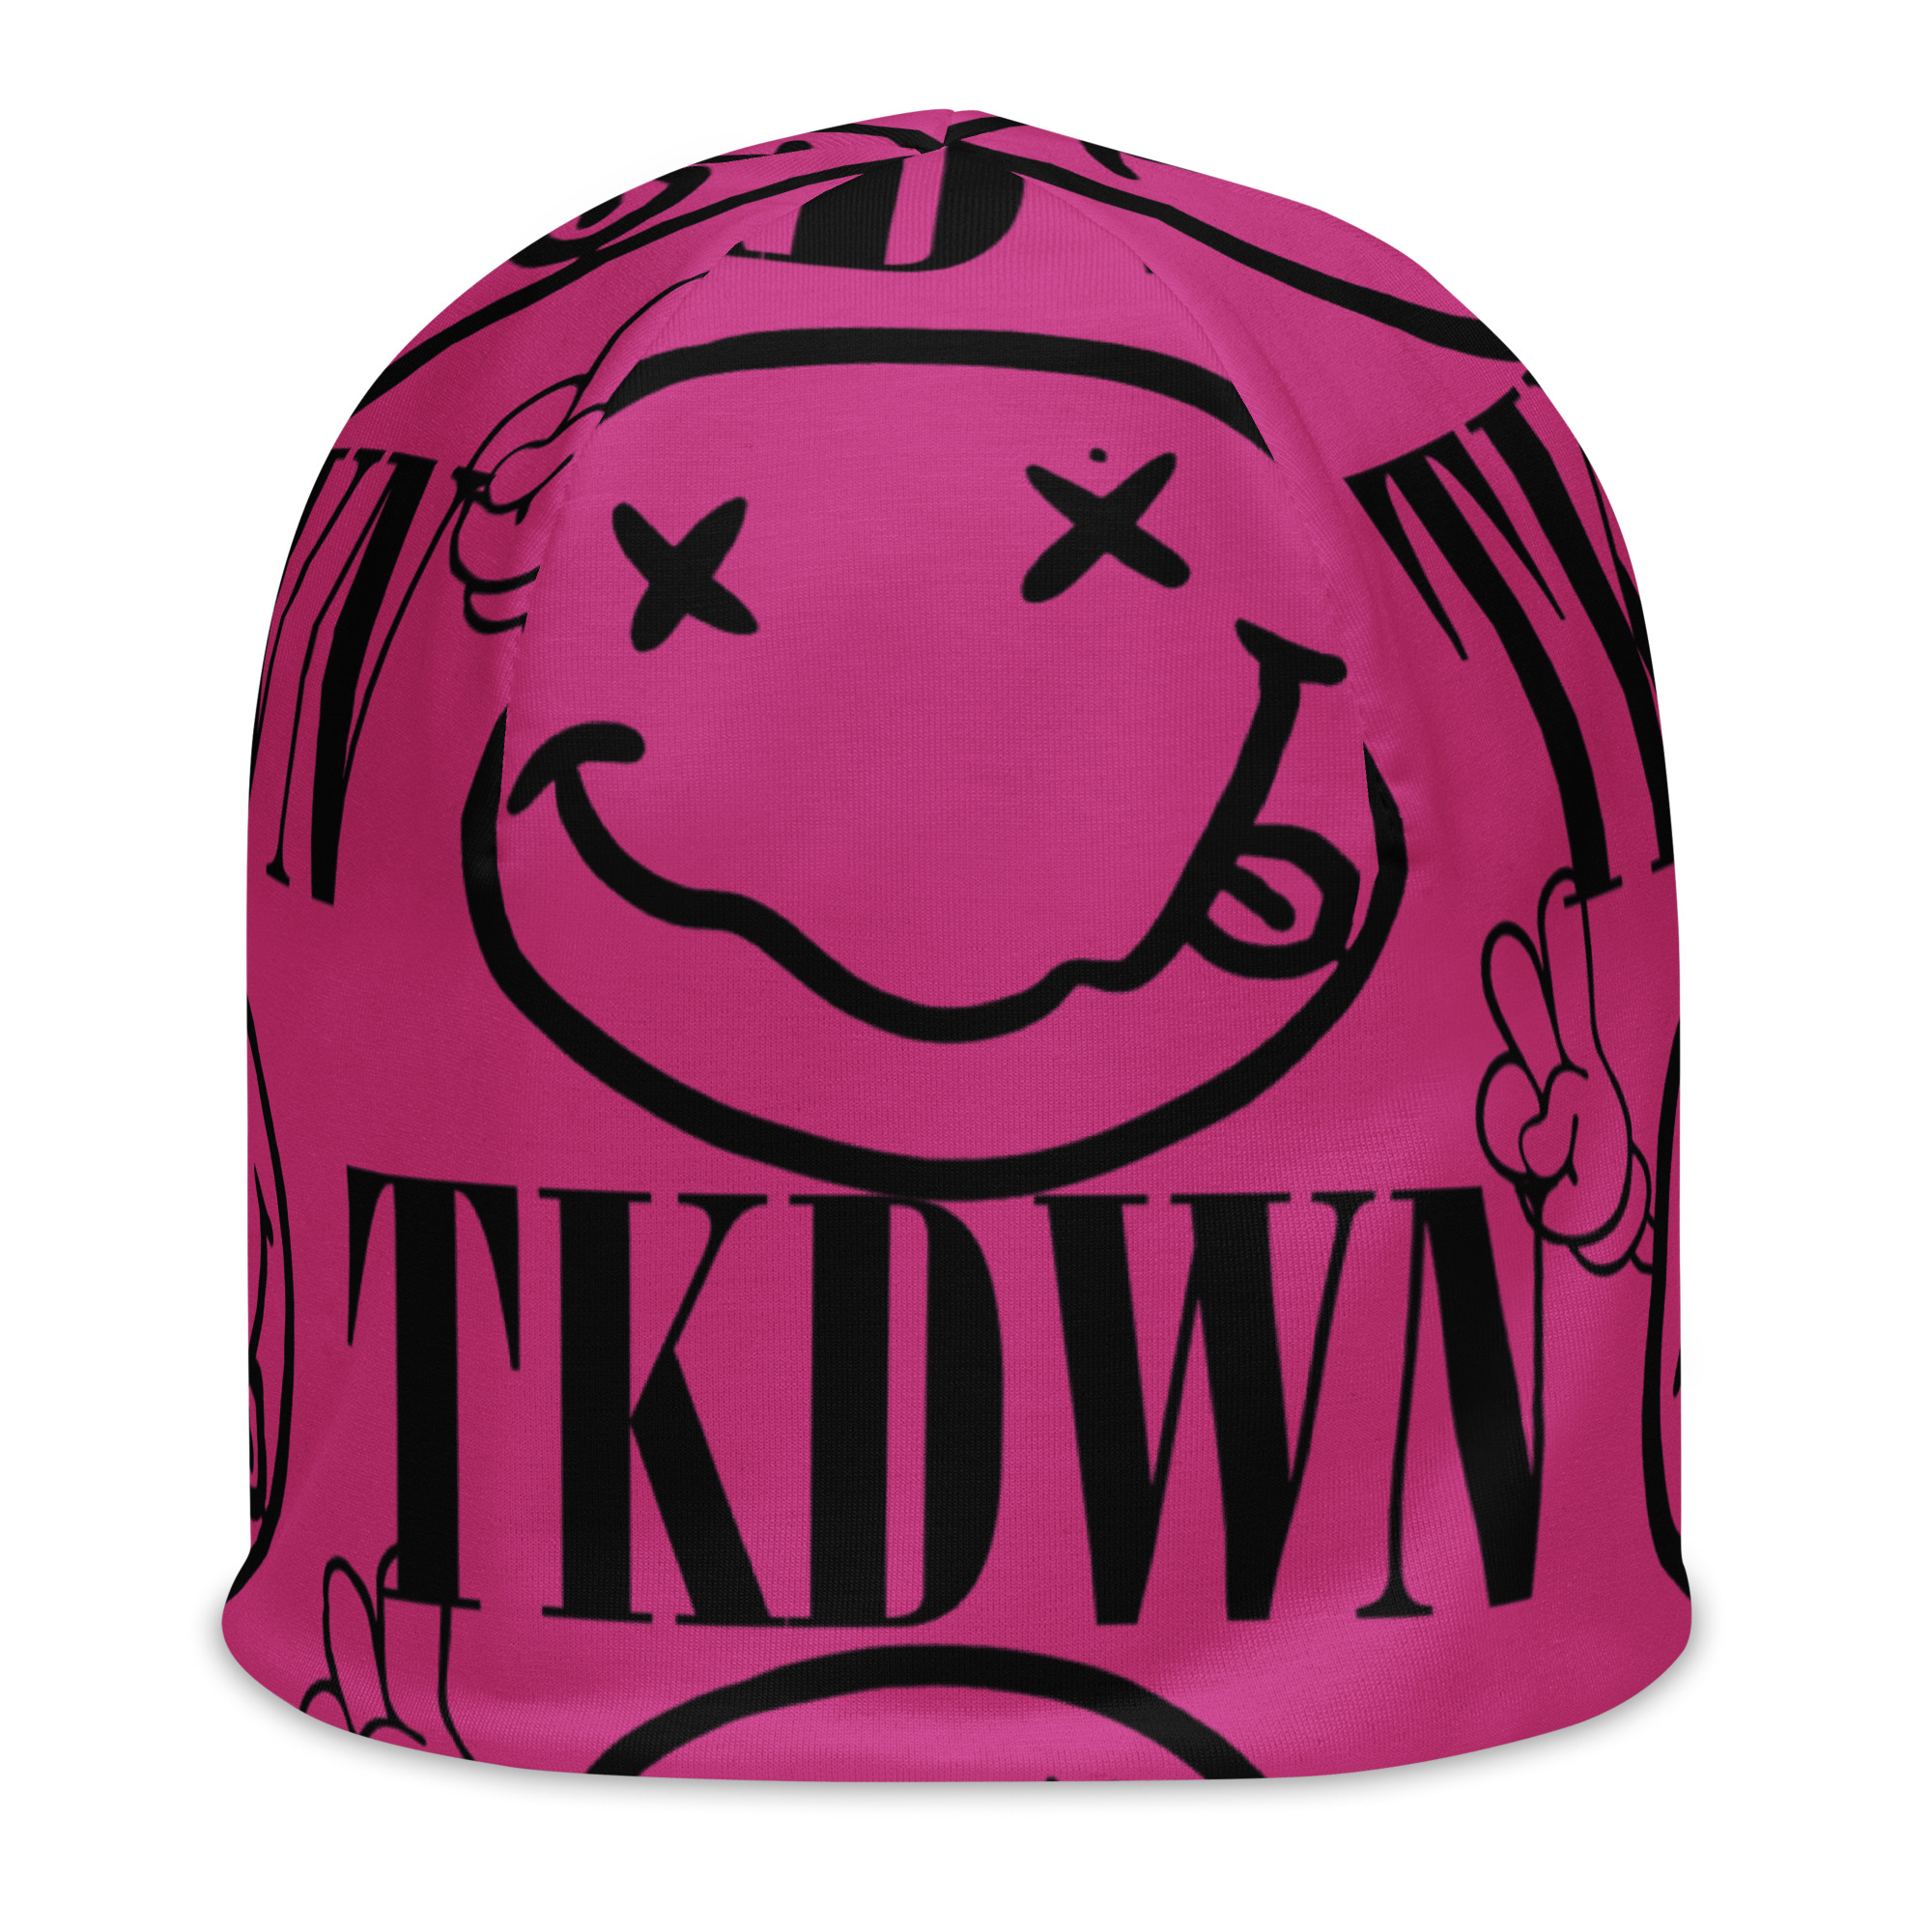 TKDWN Two Fingers All-Over Print Beanie